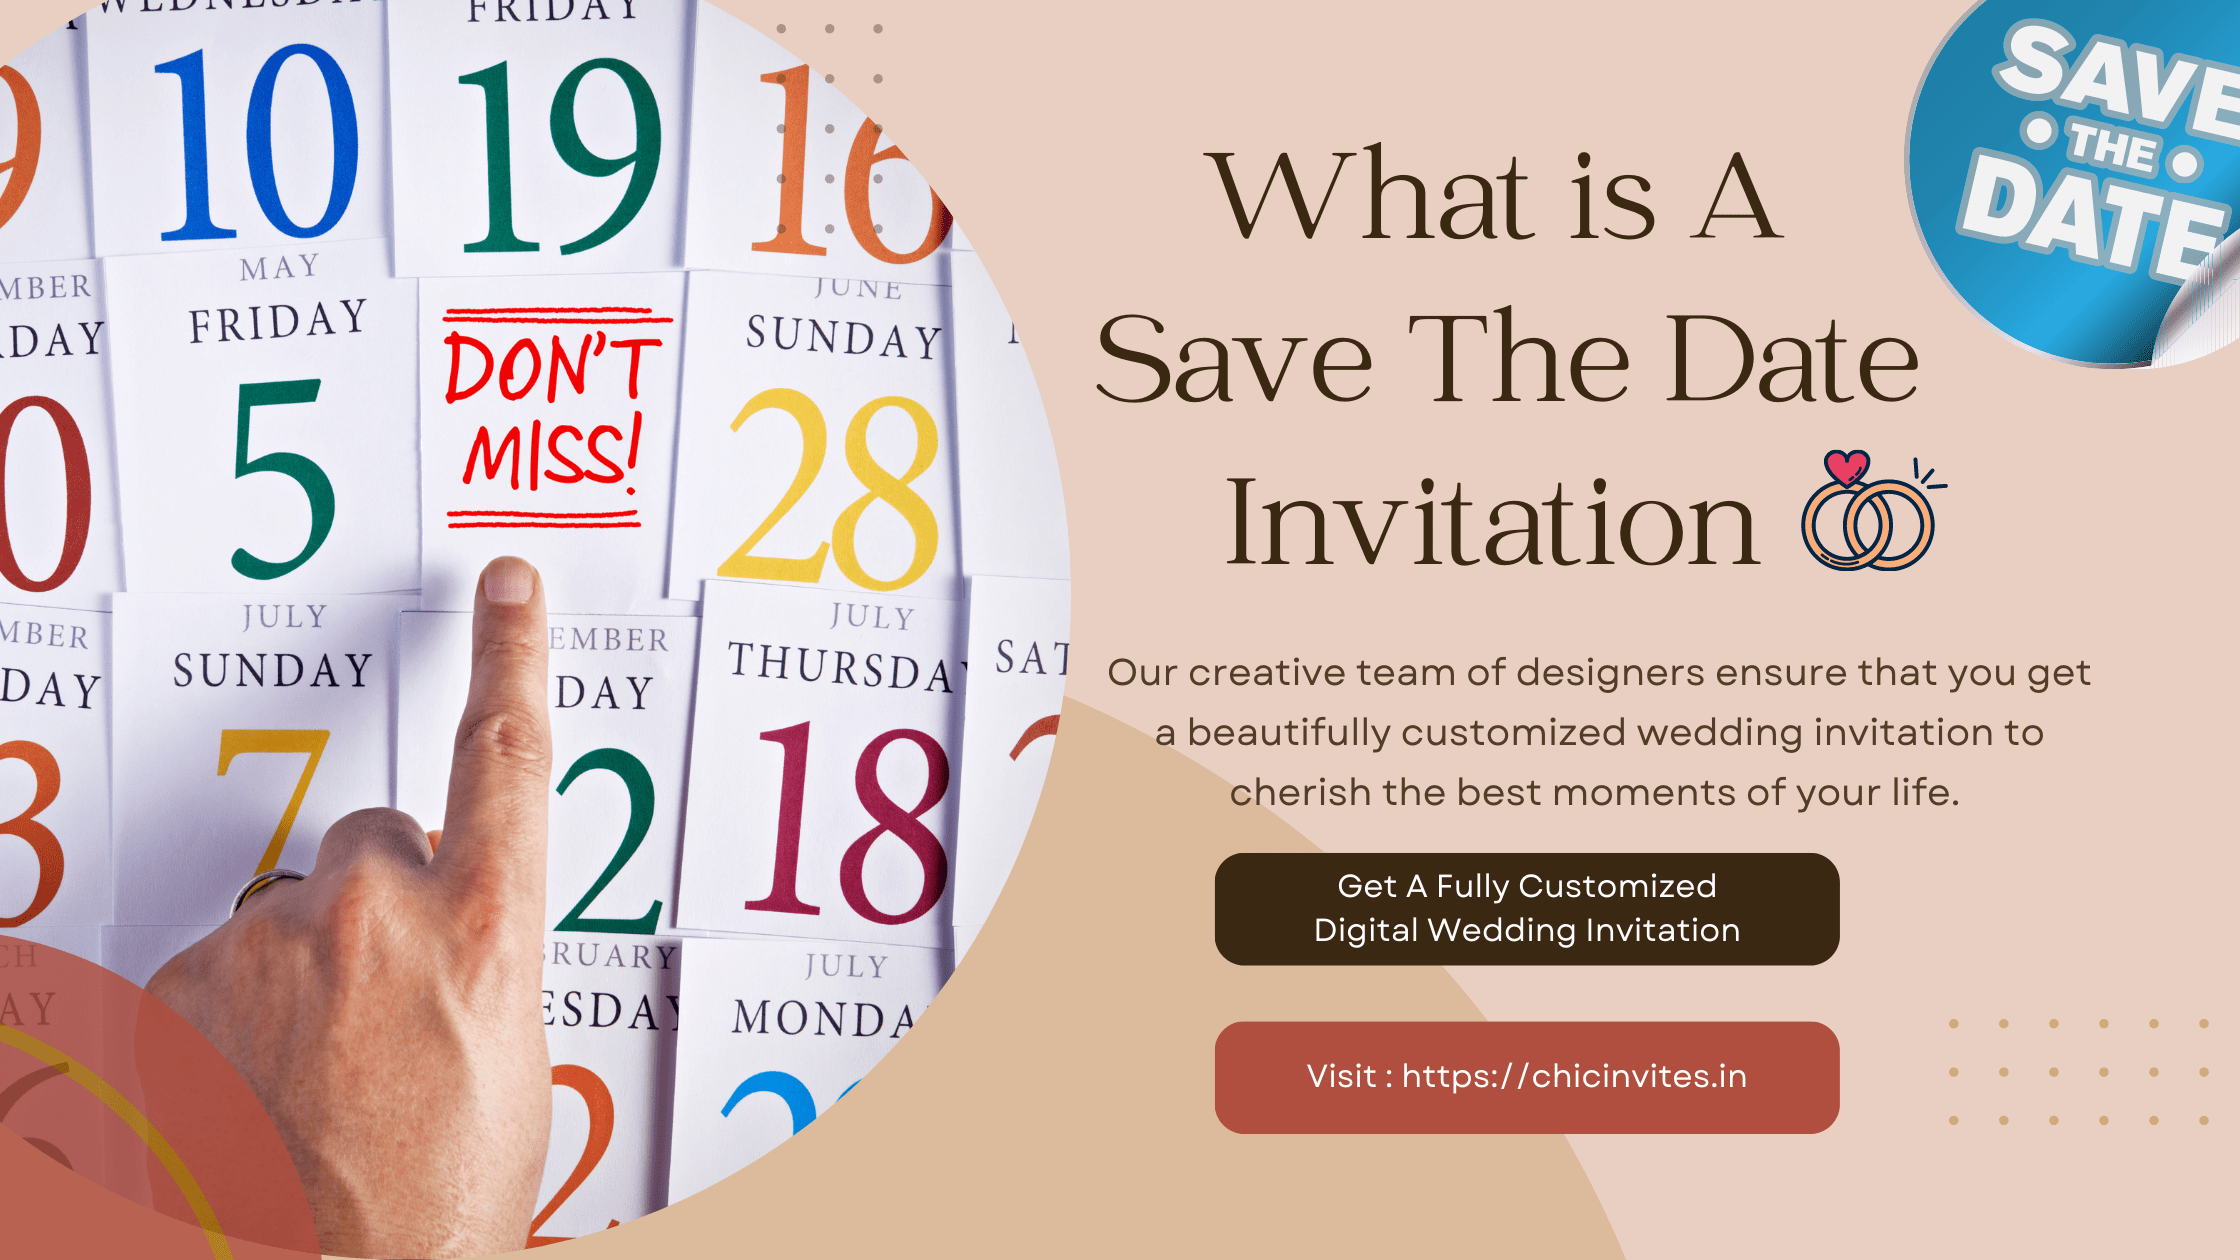 What is A Save The Date Invitation